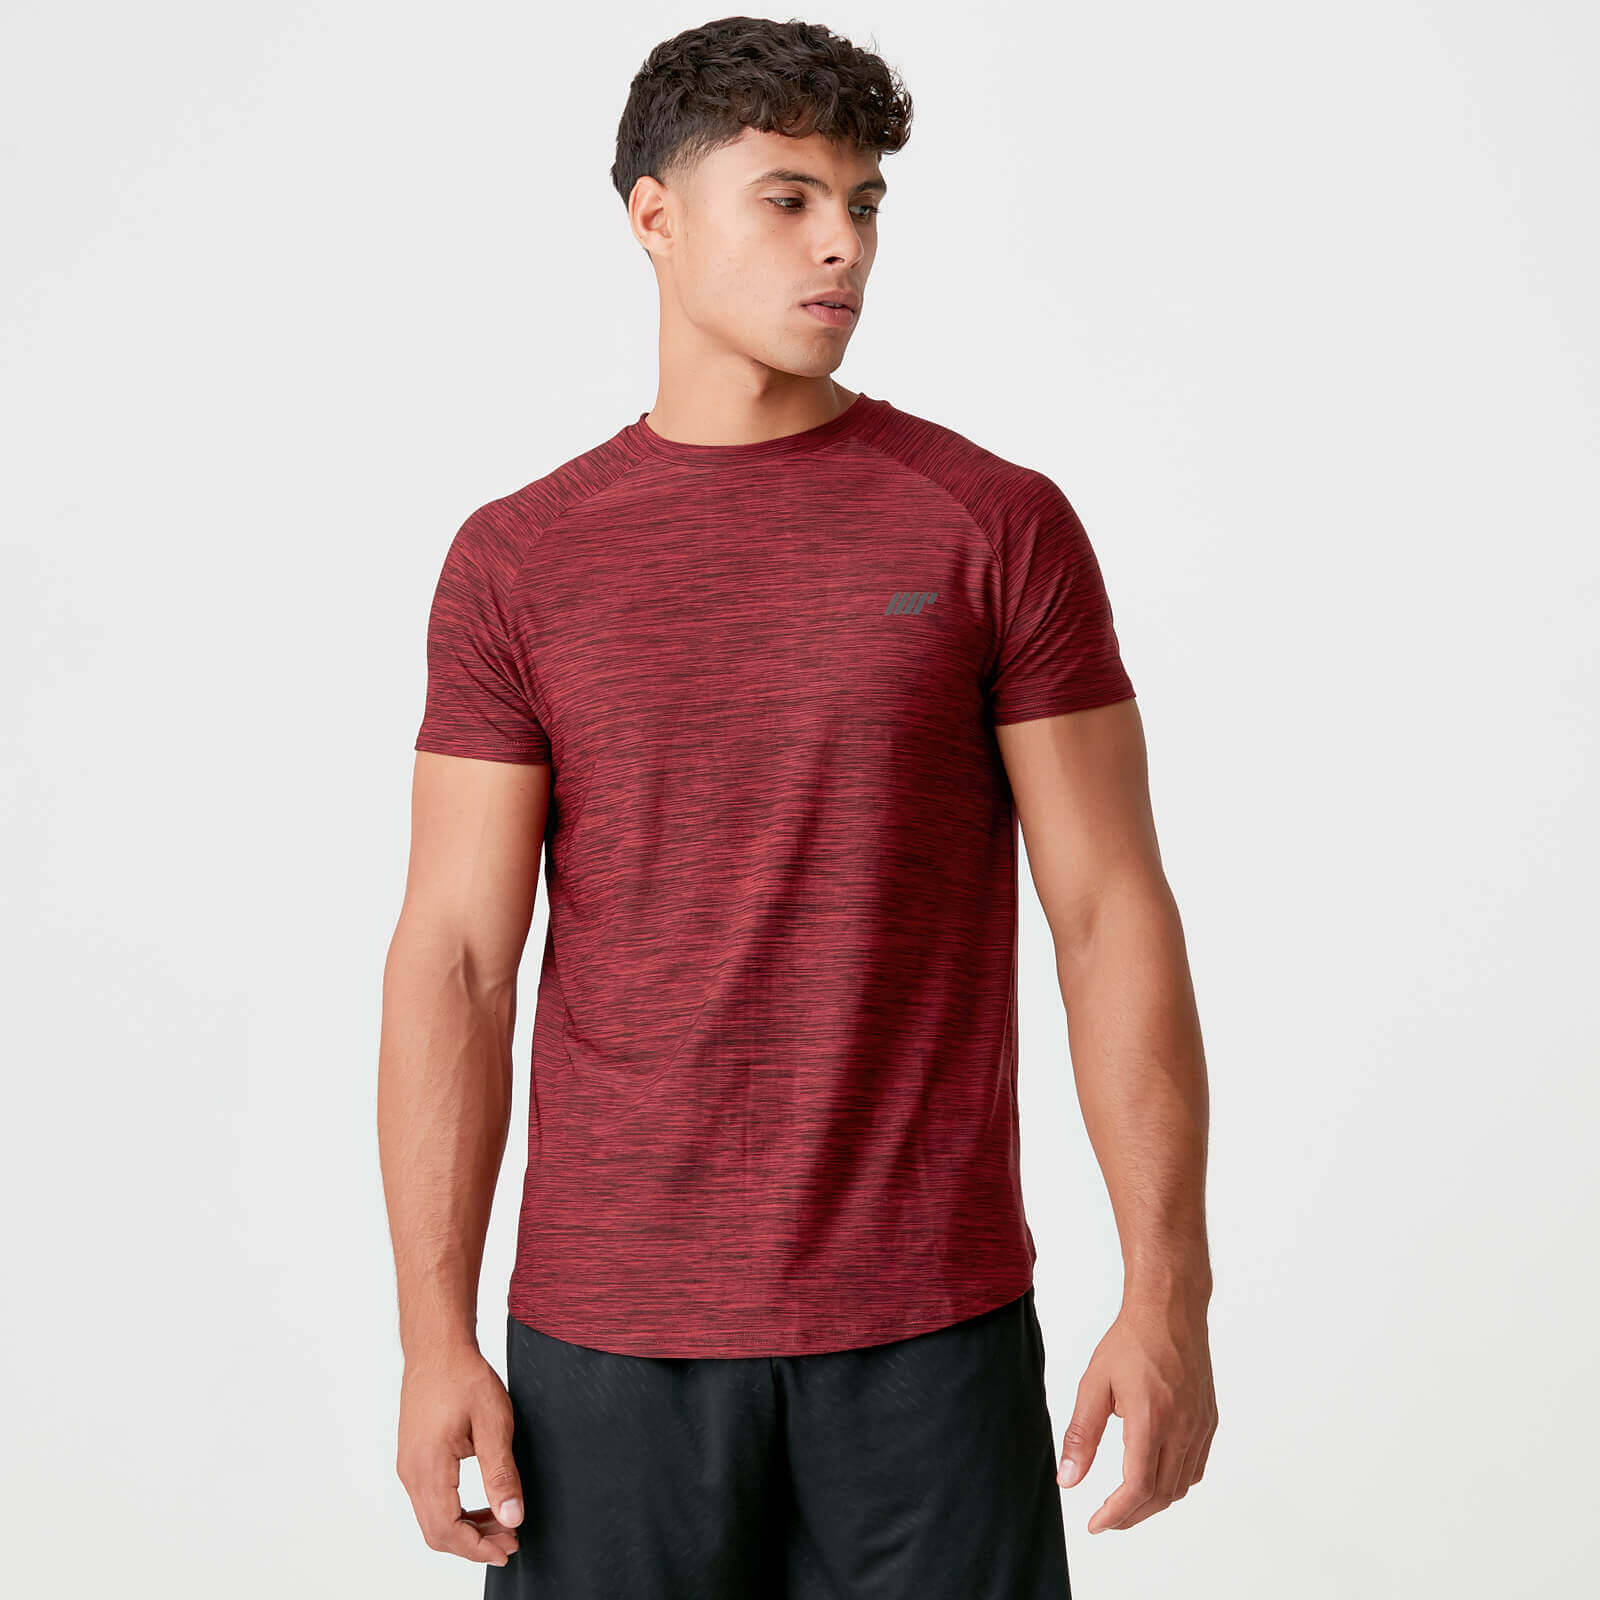 Myprotein Dry-Tech Infinity T-Shirt - Red Marl - XS